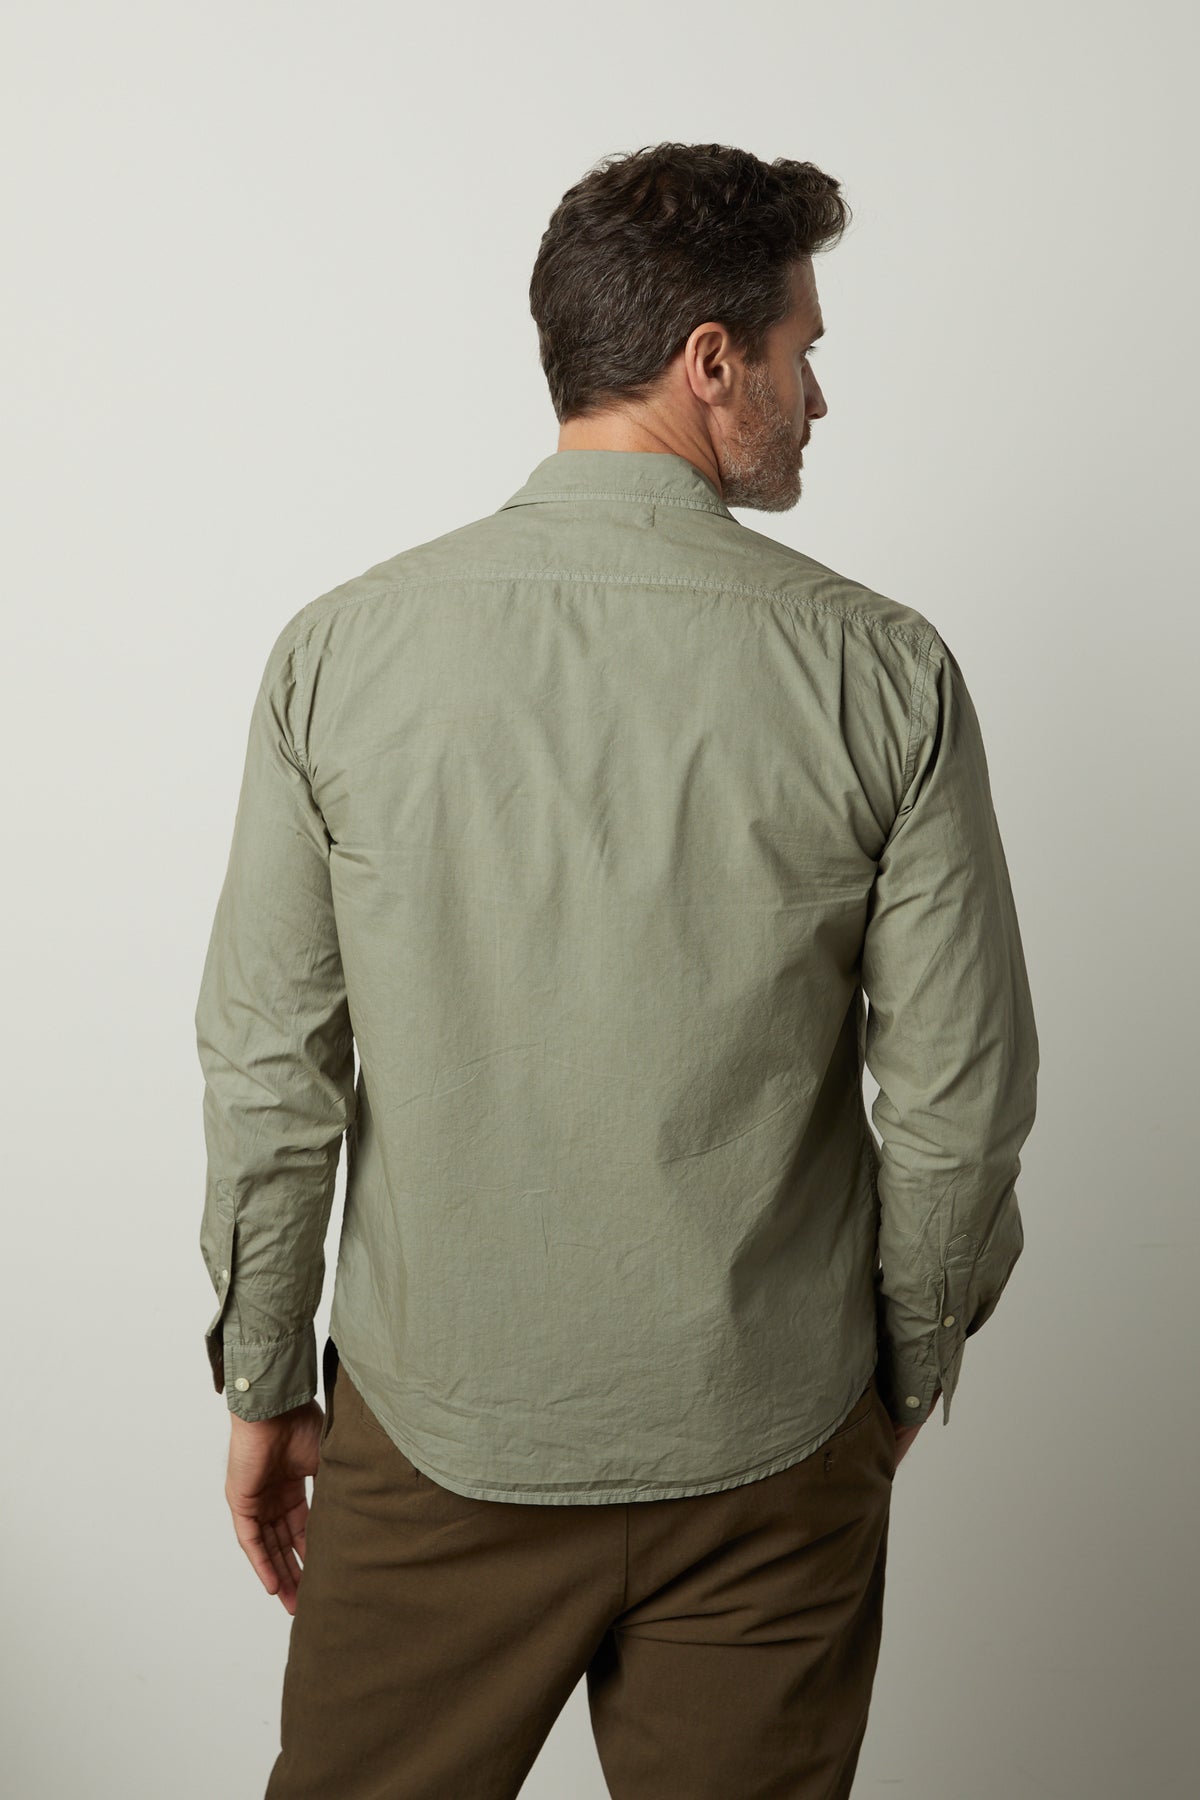   The back view of a man wearing a Velvet by Graham & Spencer BROOKS BUTTON-UP SHIRT and khaki pants. 